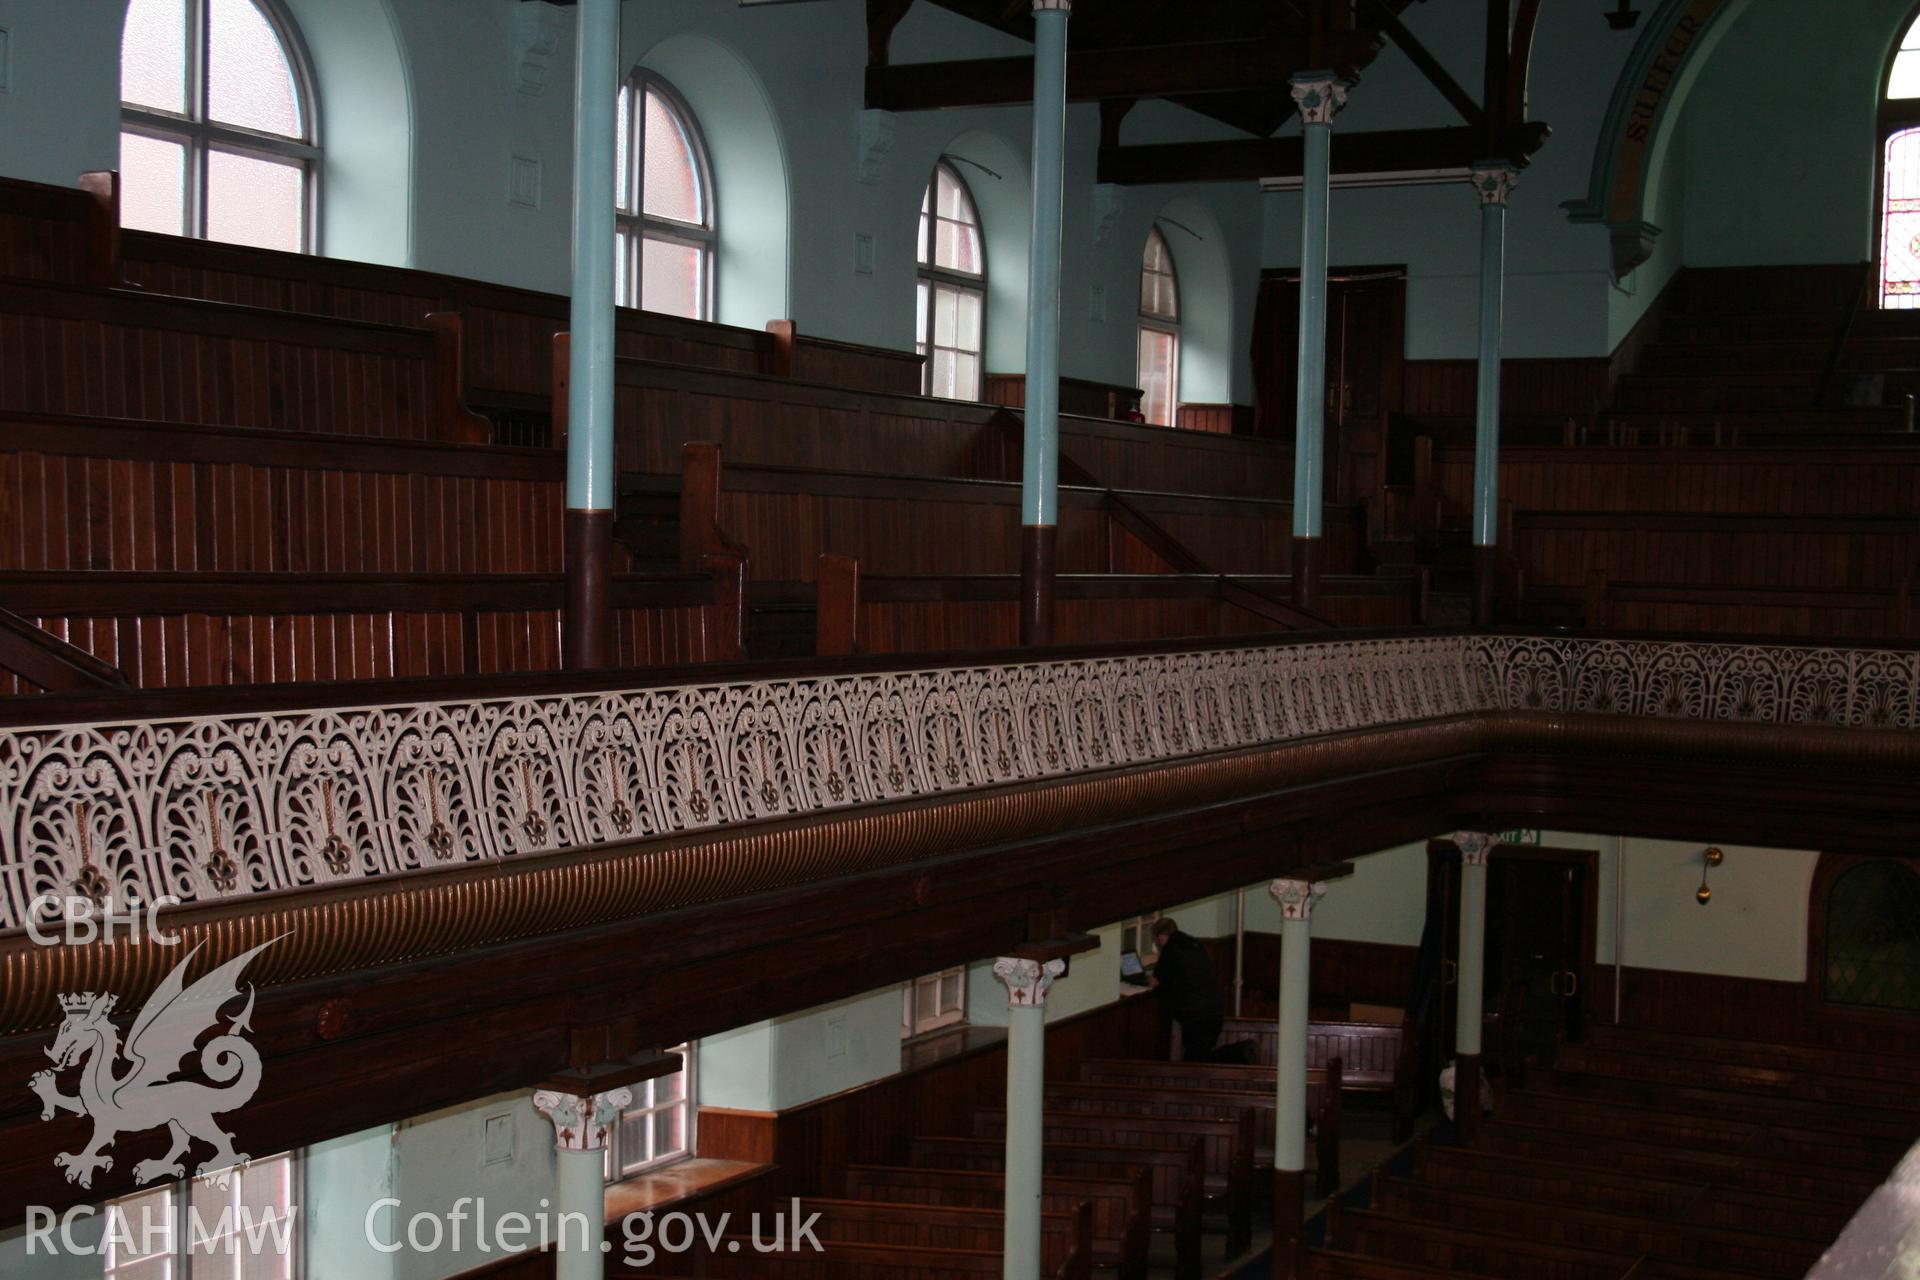 Hanbury Road baptist chapel, Bargoed, digital colour photograph showing interior - balconies, received in the course of Emergency Recording case ref no RCS2/1/2247.